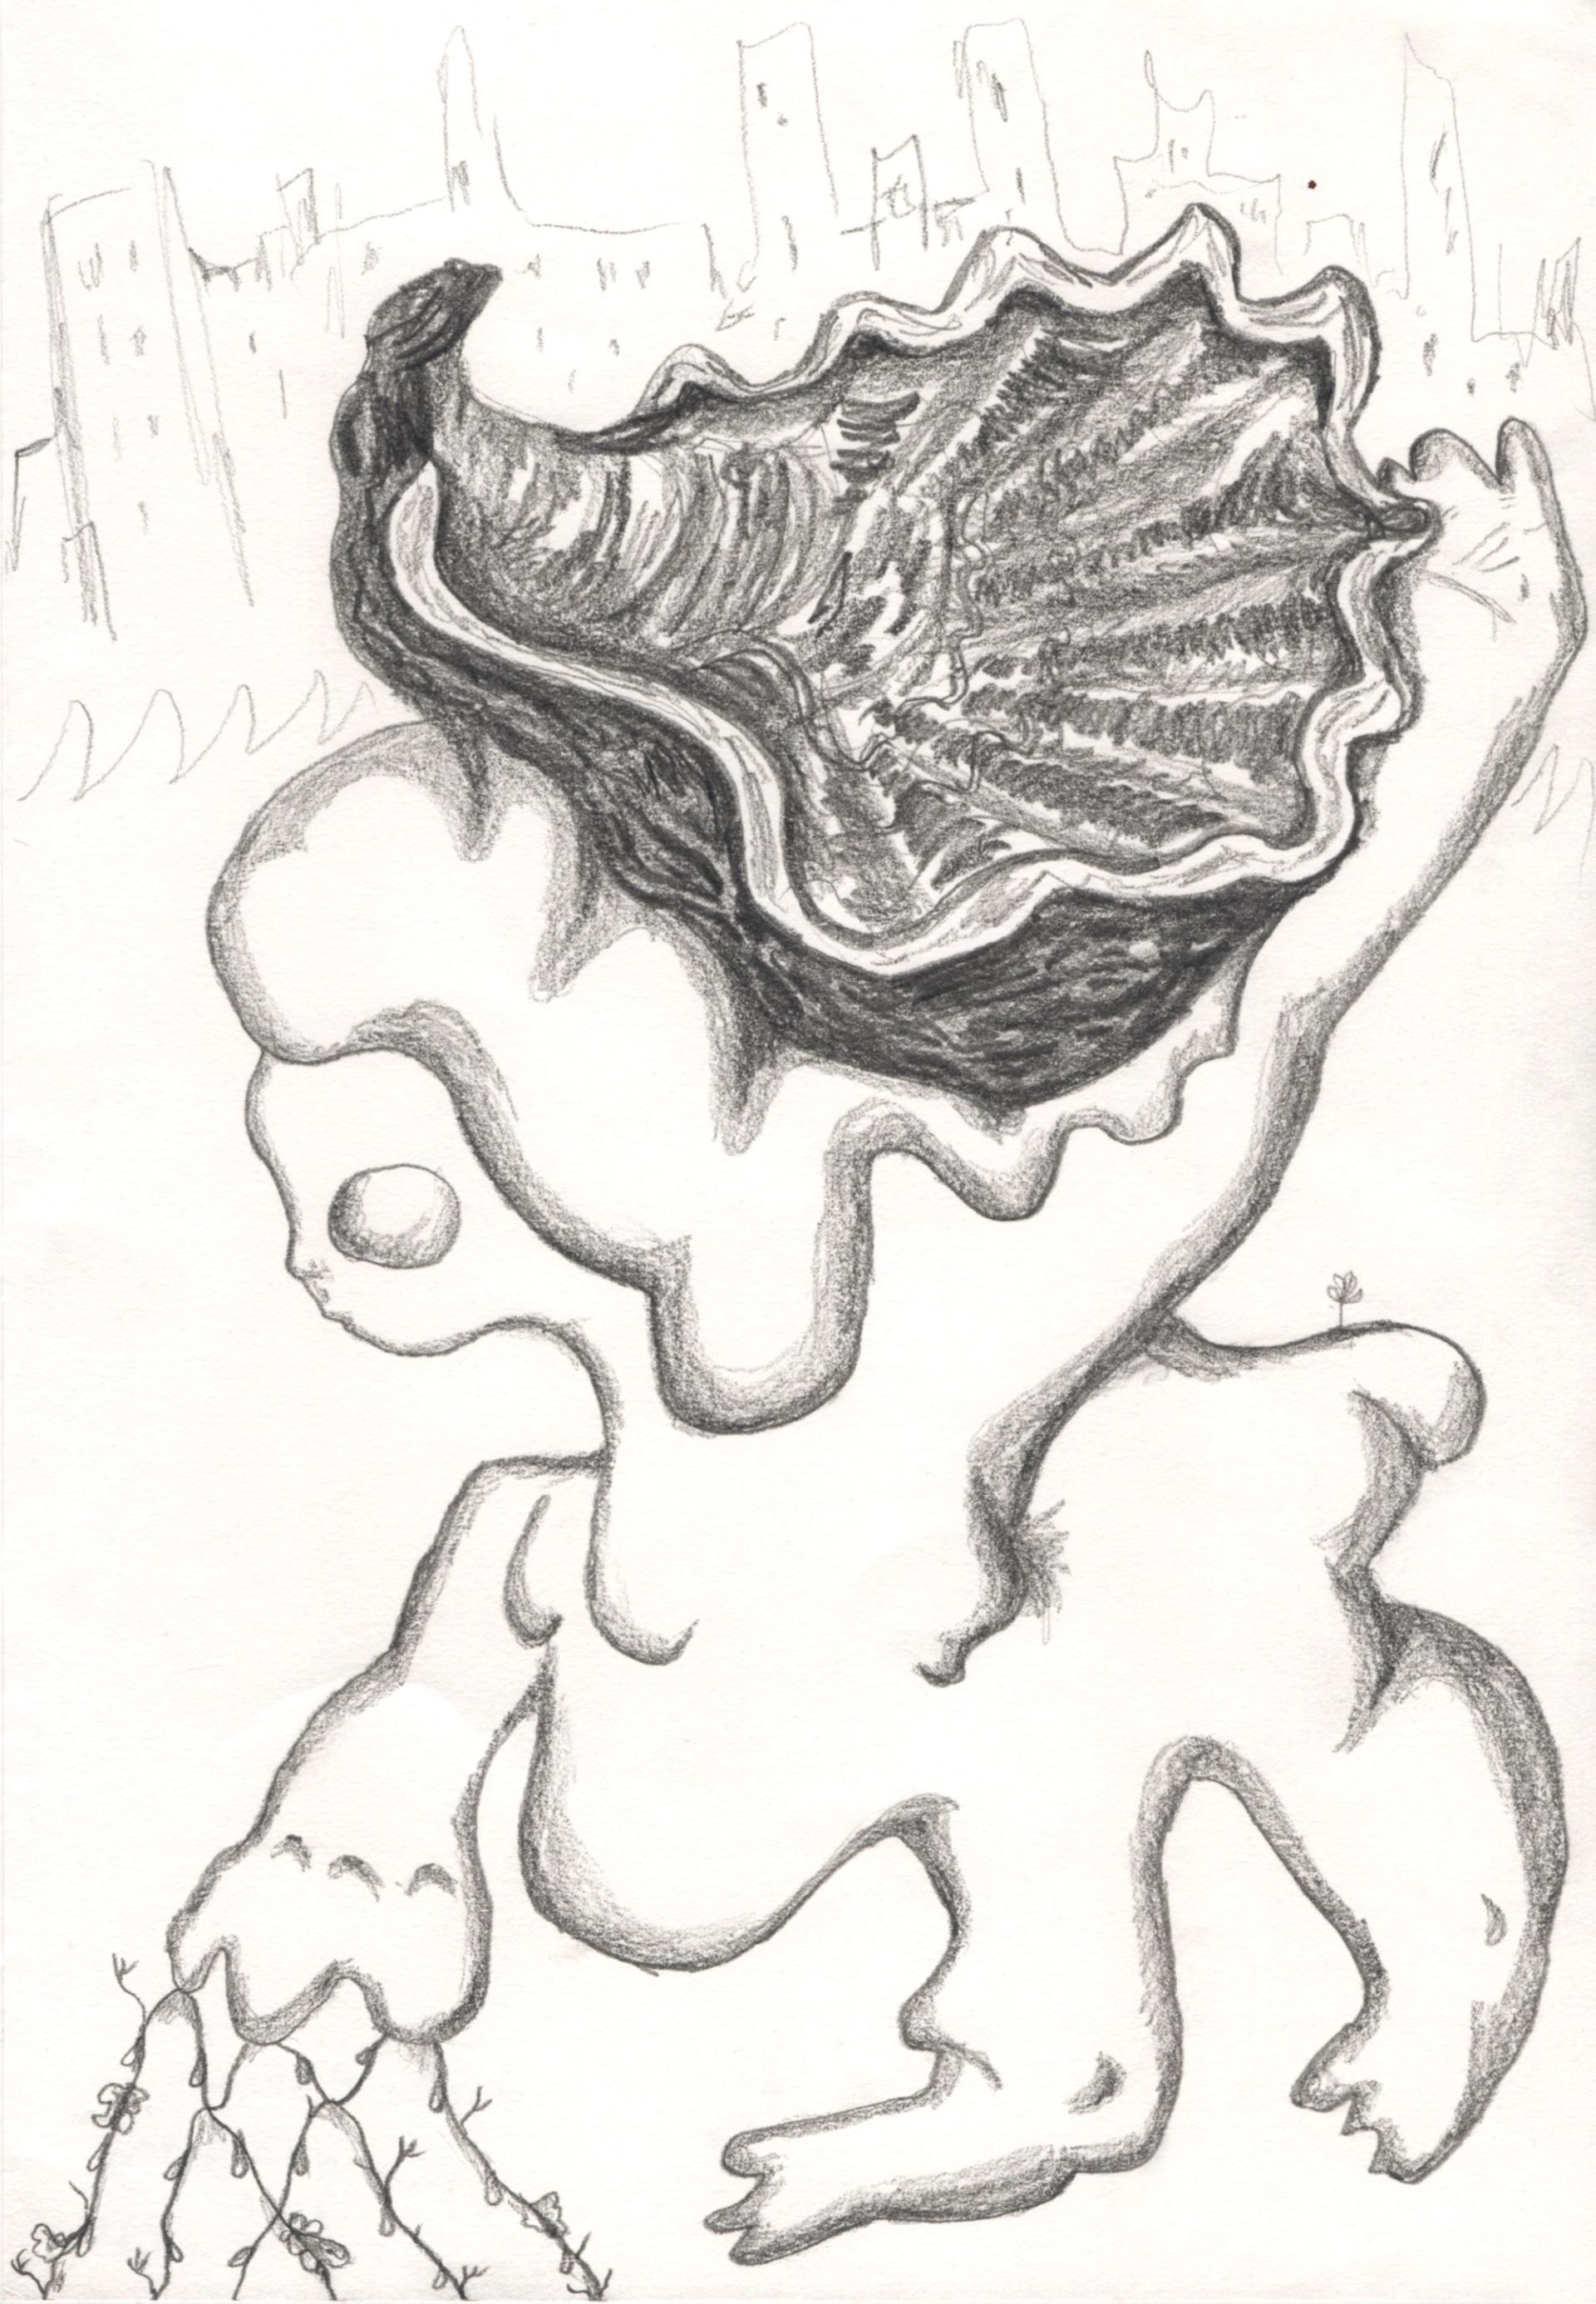 Anna McCarthy, Oyster Girl, 2023, pencil on paper, 30 × 21 cm, Courtesy the artist and Sperling, Munich